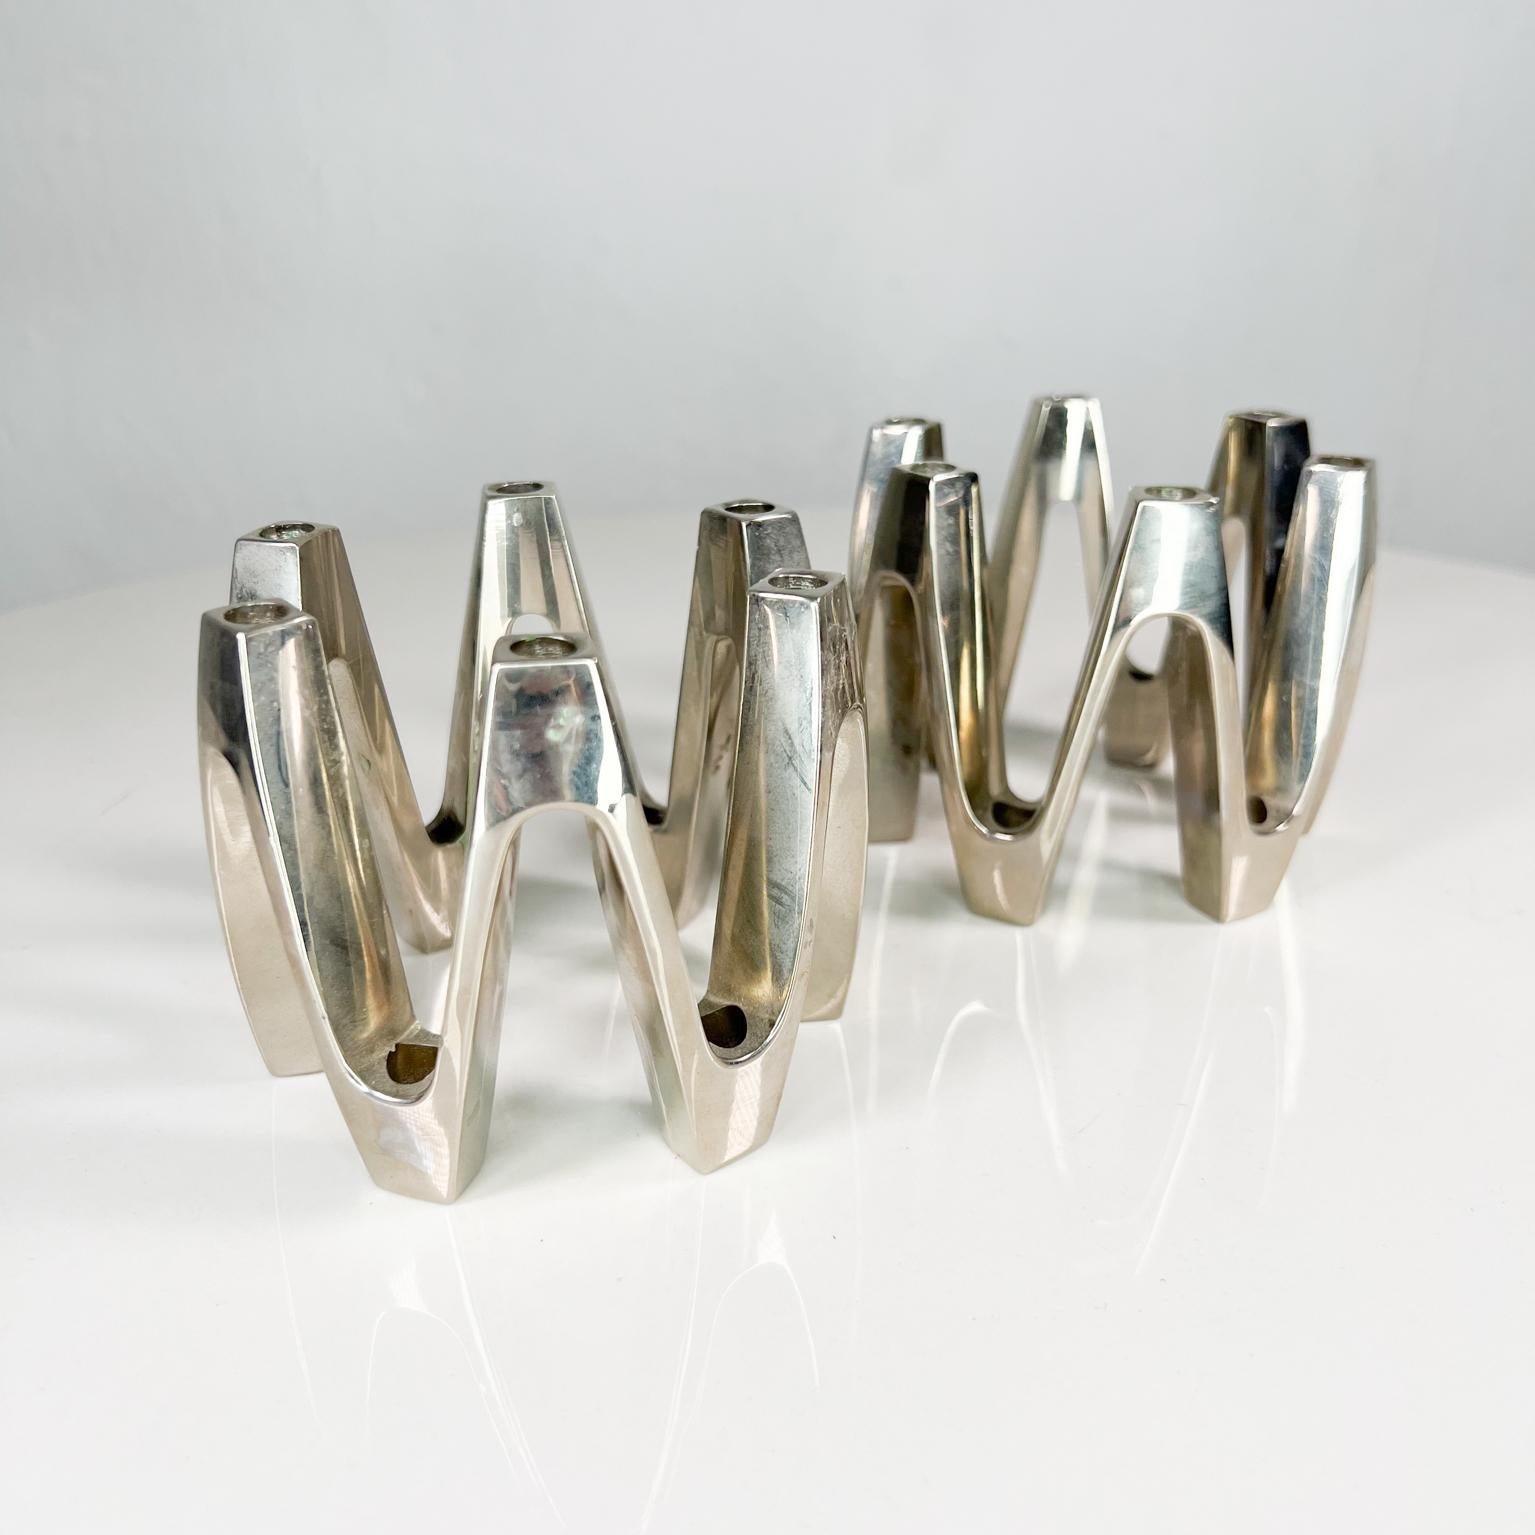 1960s Dansk by Jens Quistgaard JHQ Mid-Century Modernist crown candle holders in silverplate.
Can accommodate 6 thin tapered candles each.
Marked 'Dansk' to the underside.
Measures: 3.63 diameter x 3 tall
Preowned original vintage condition,